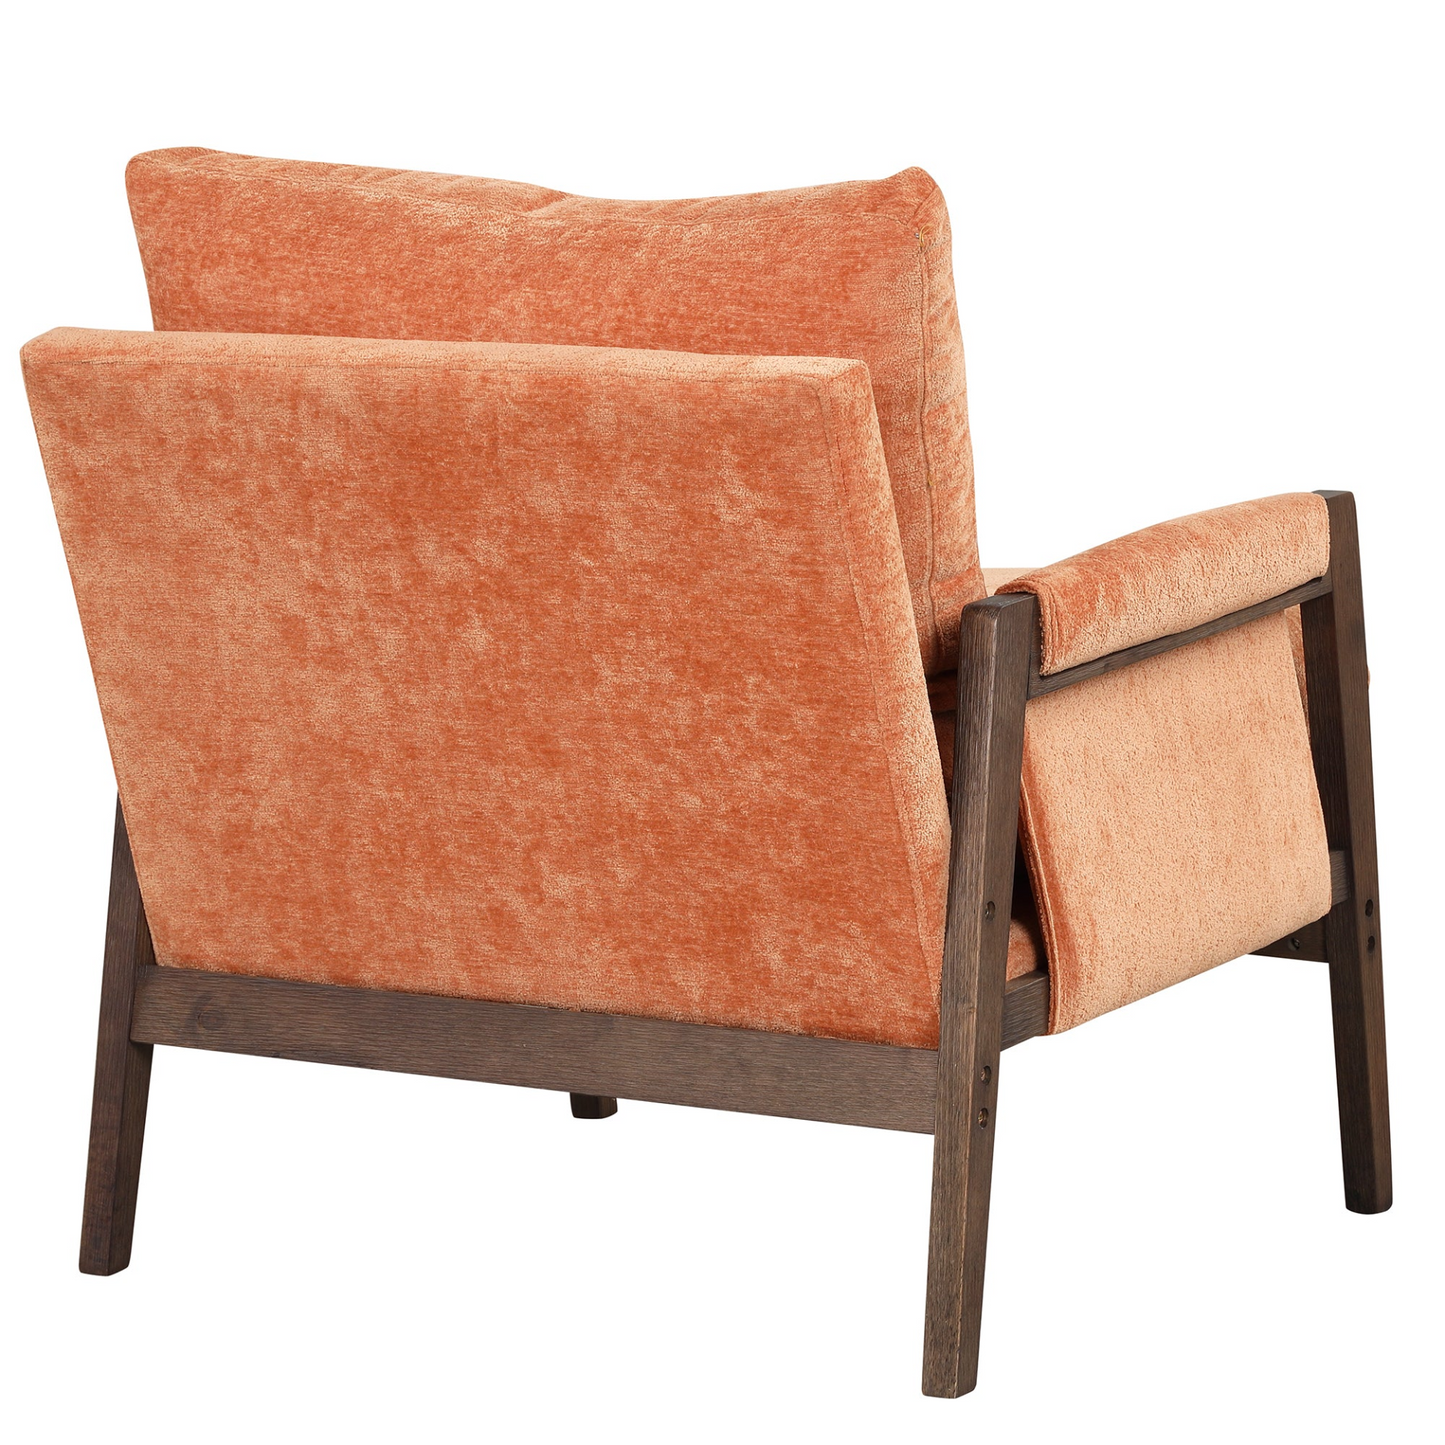 Mid-Century Modern Velvet Accent Chair,Leisure Chair with Solid Wood and Thick Seat Cushion for Living Room,Bedroom,Studio,Orange Môdern Space Gallery